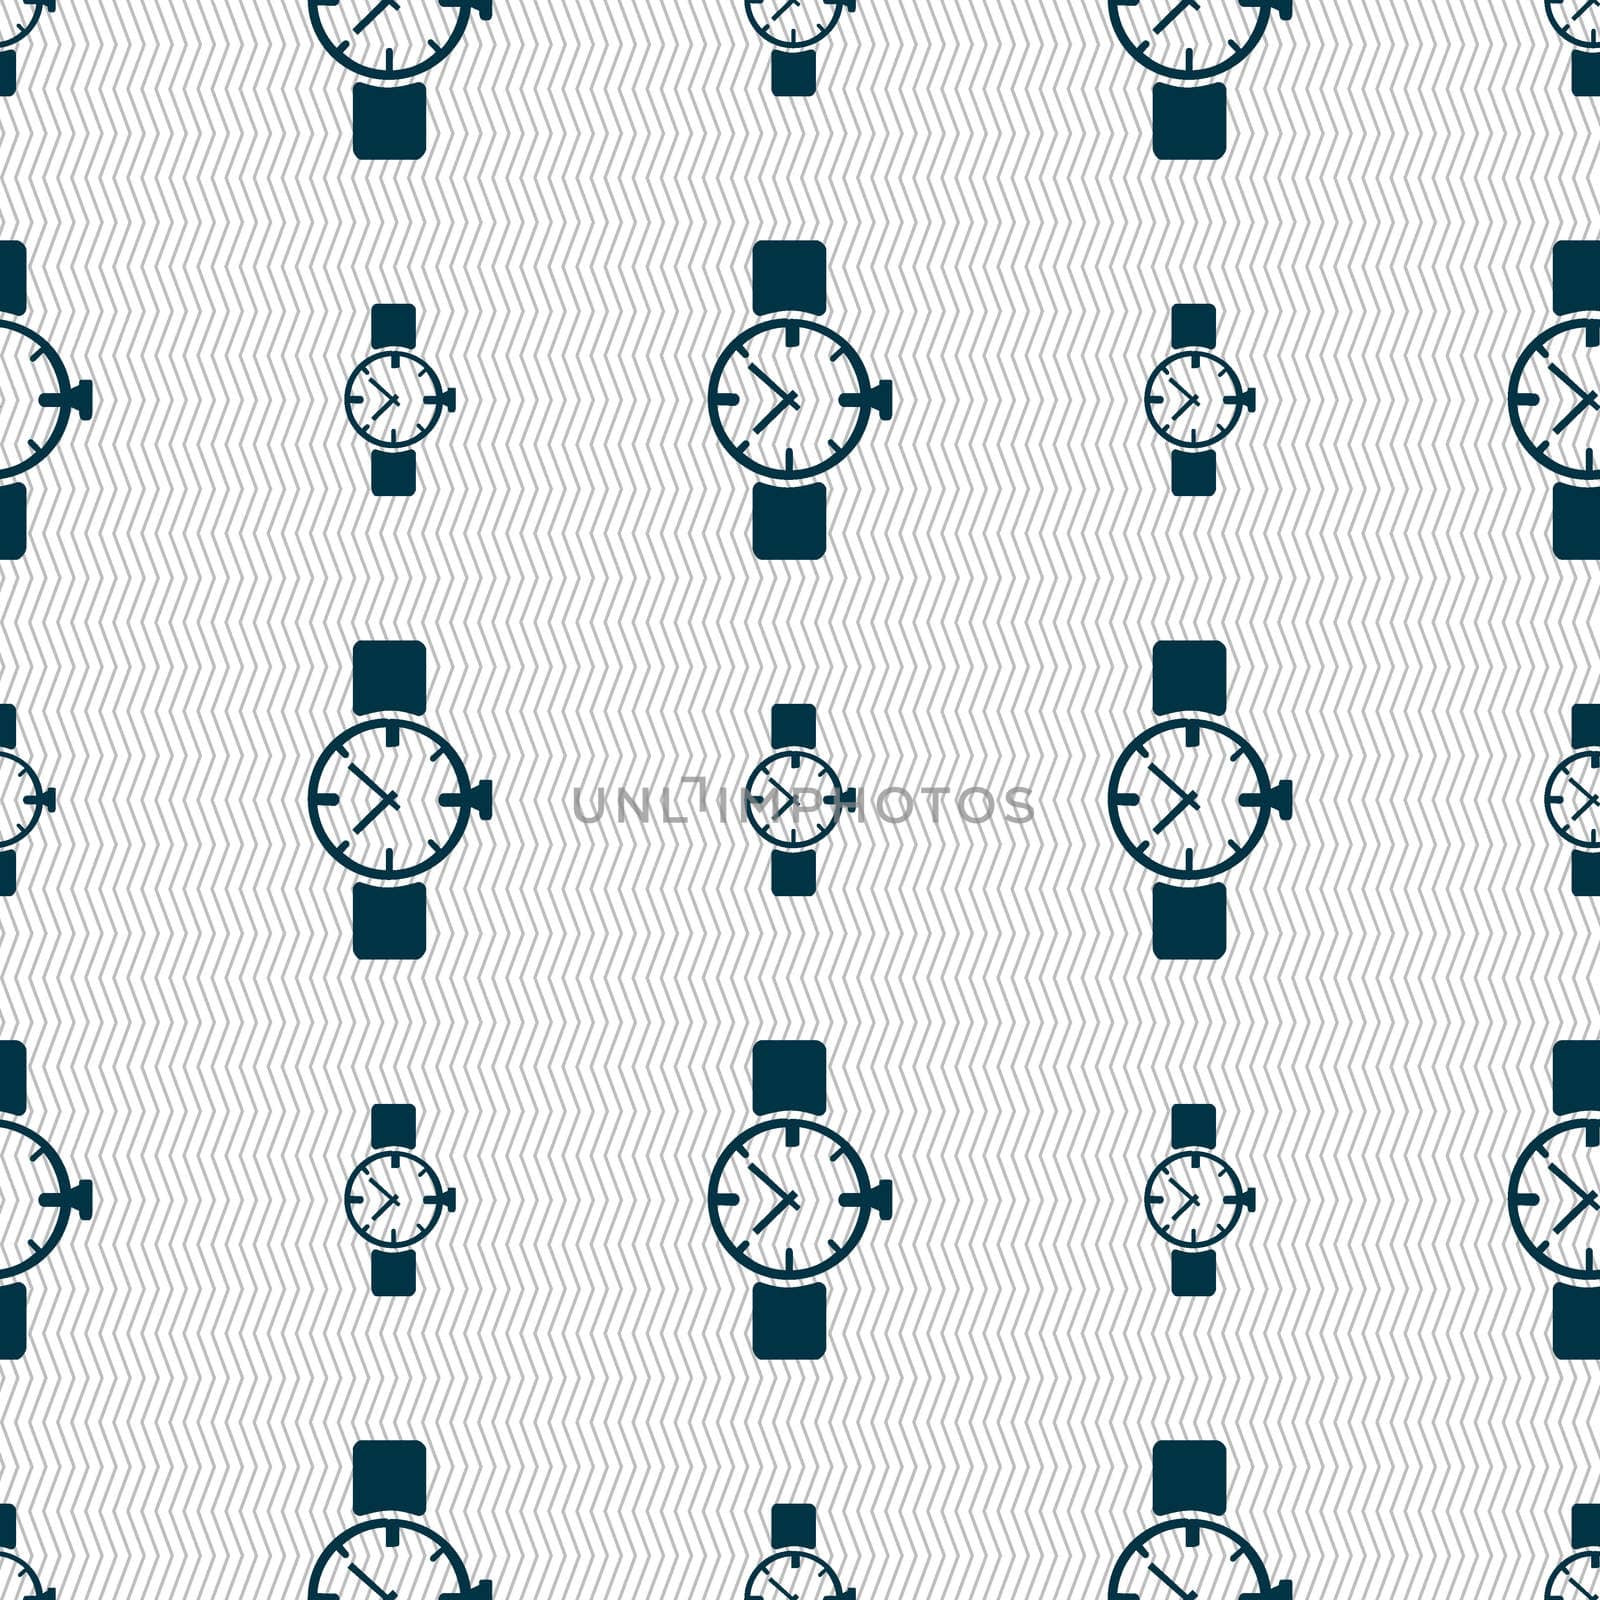 watches icon symbol . Seamless abstract background with geometric shapes. illustration